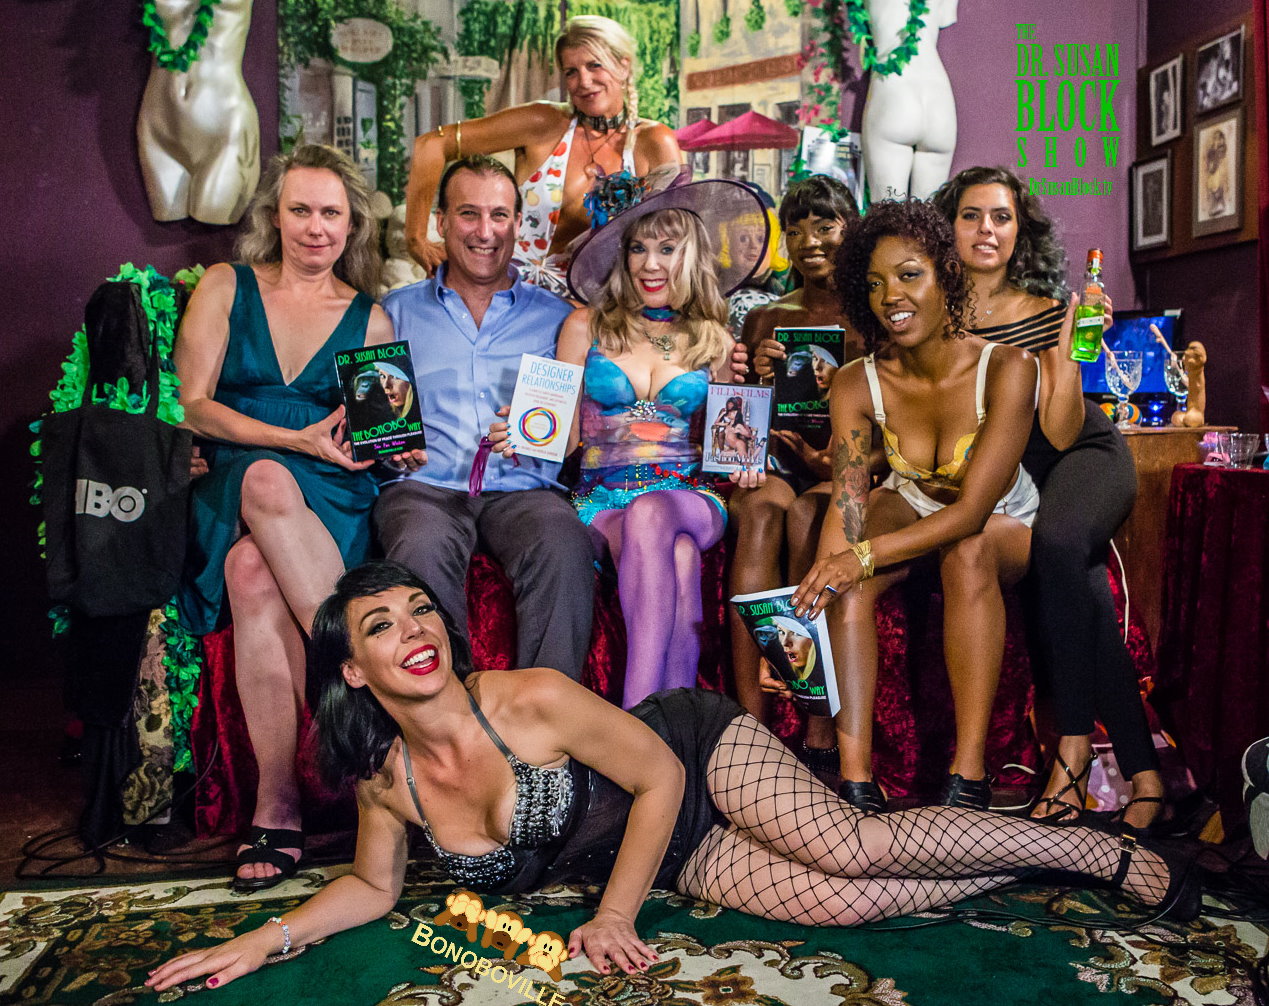  Patricia Johnson & Mark A. Michaels, Dr. Susan Block with "Designer Relationships" & Filly Films "Filthy Fashion Models," Ana Foxxx with The Bonobo Way, Lotus Lain book-spanking bday gal Biz Bonobo, Rebekah Nazarian with Agwa Coca Leaf Liqueur. Chelsea Demoiselle. Photo: Jux Lii